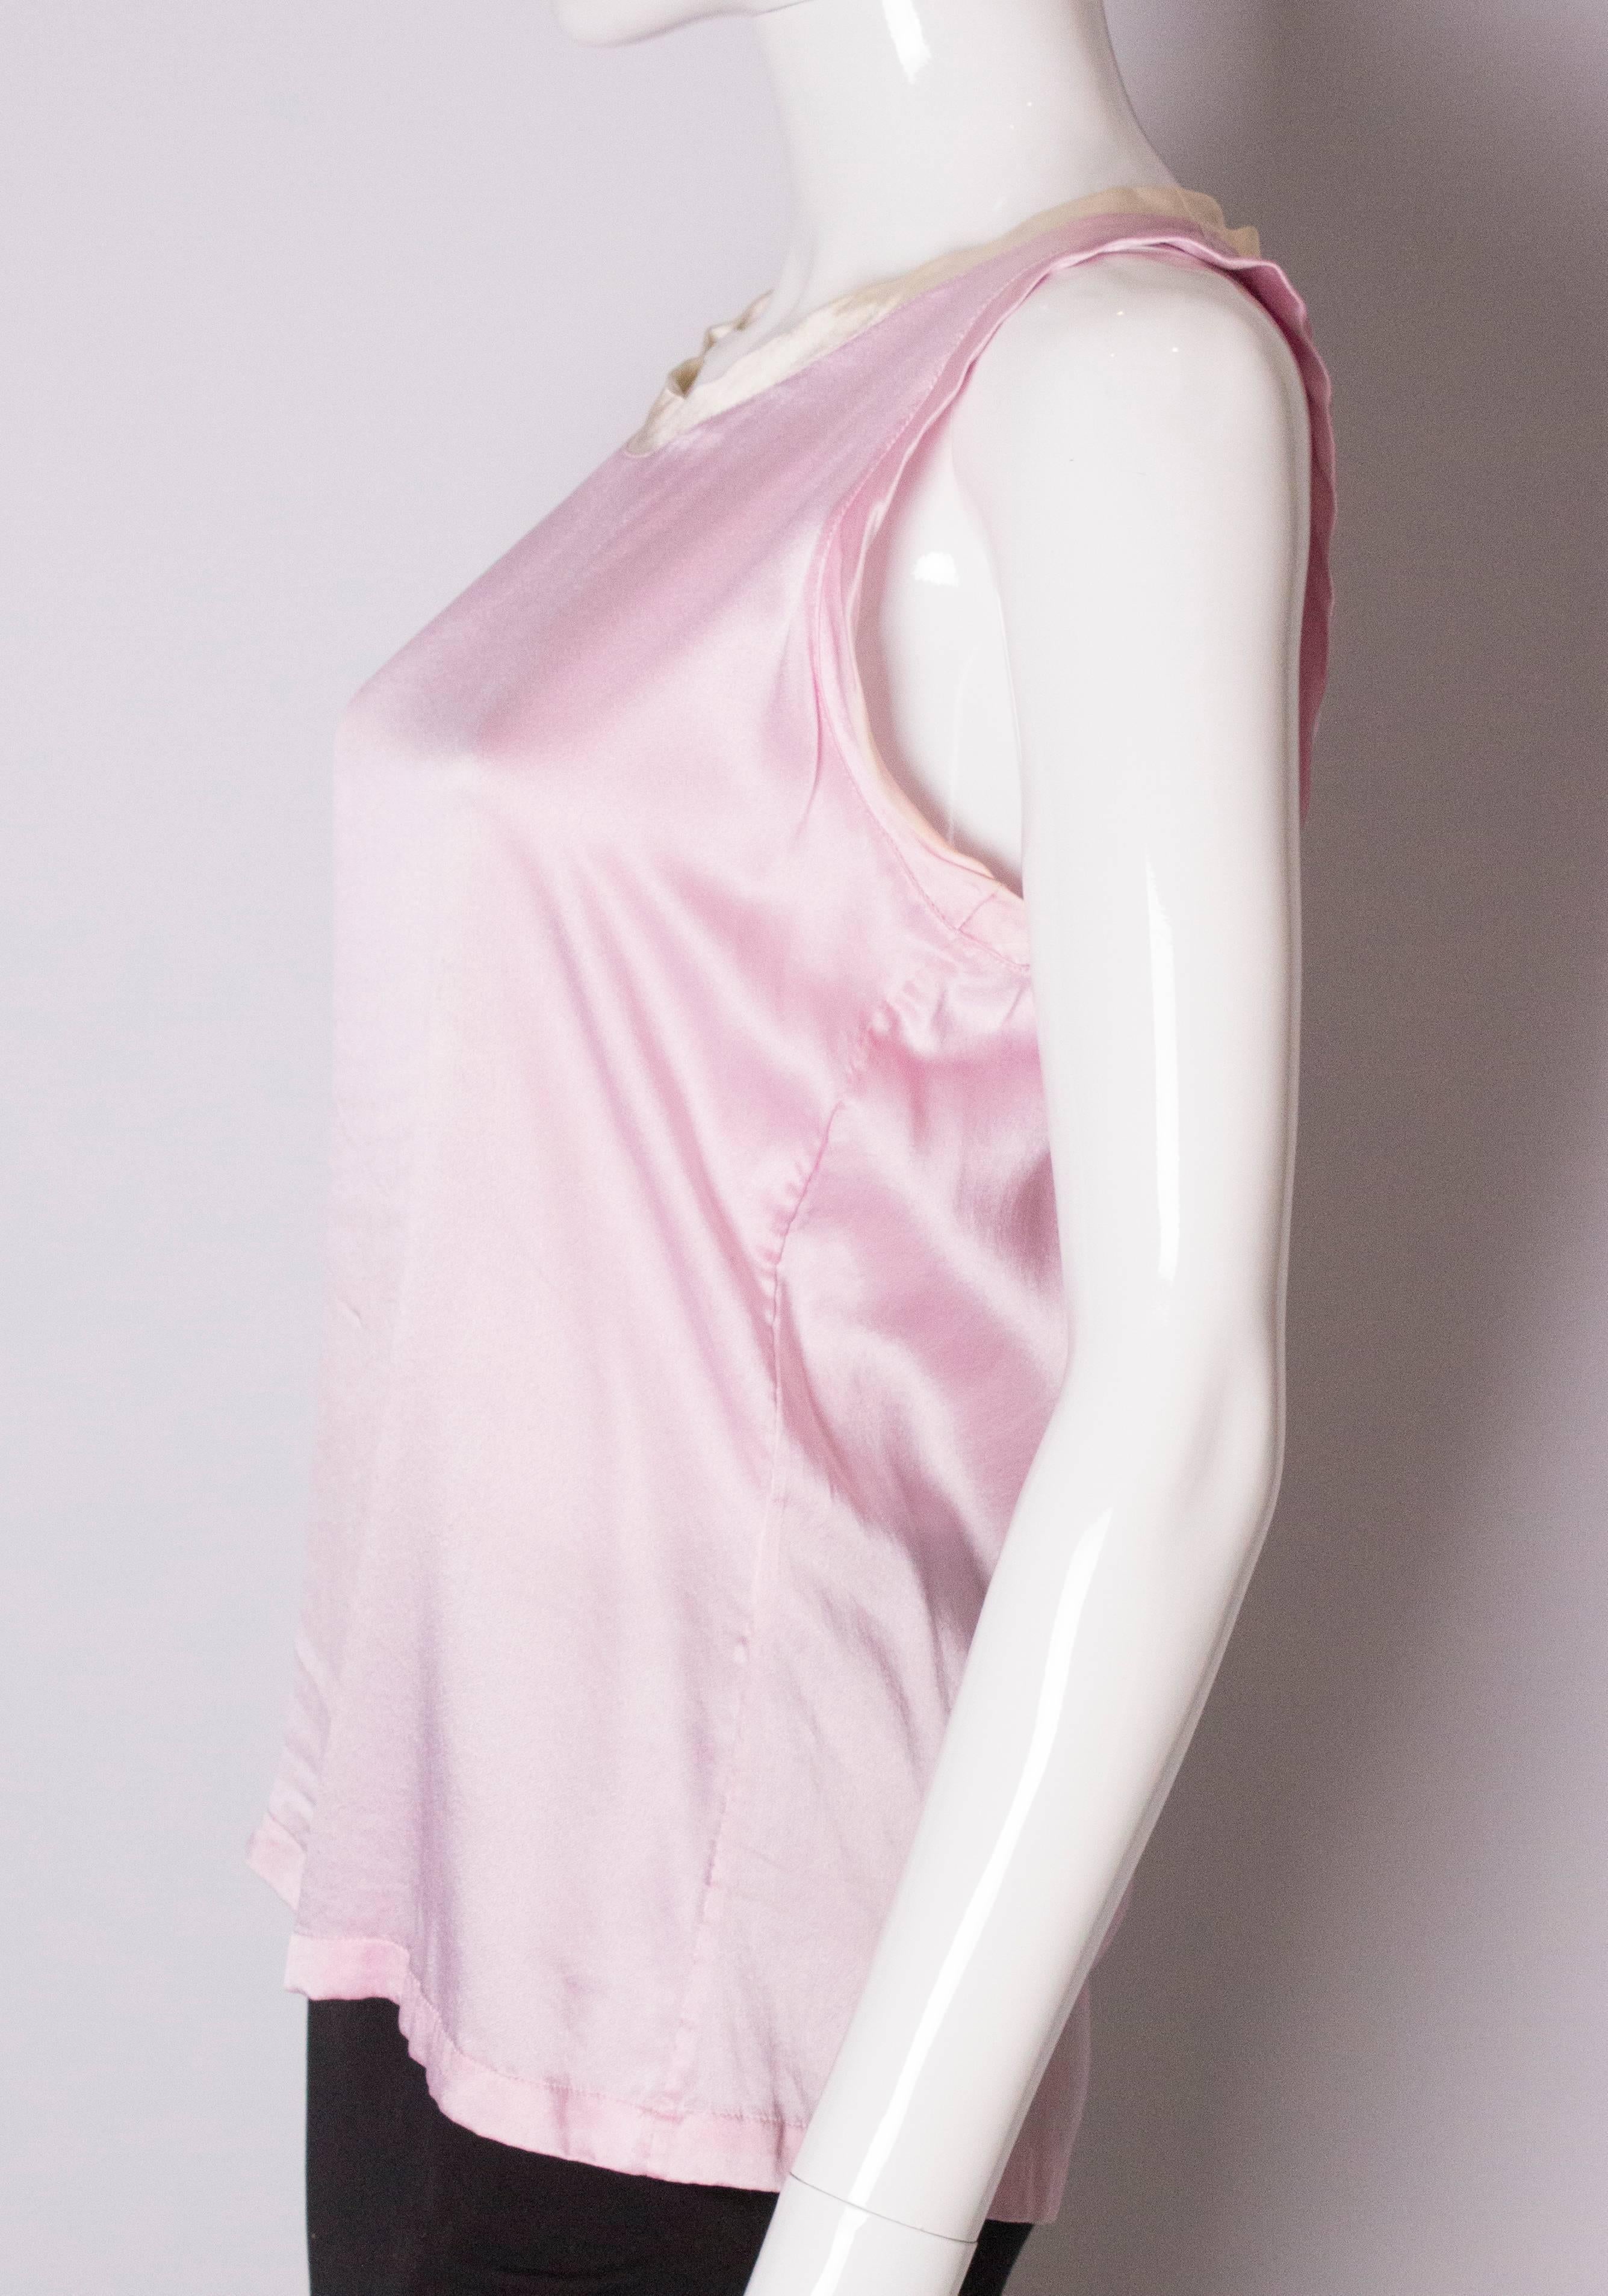 Women's Vintage Yves Saint Laurent Rive Gauche Pink and White Silk Top